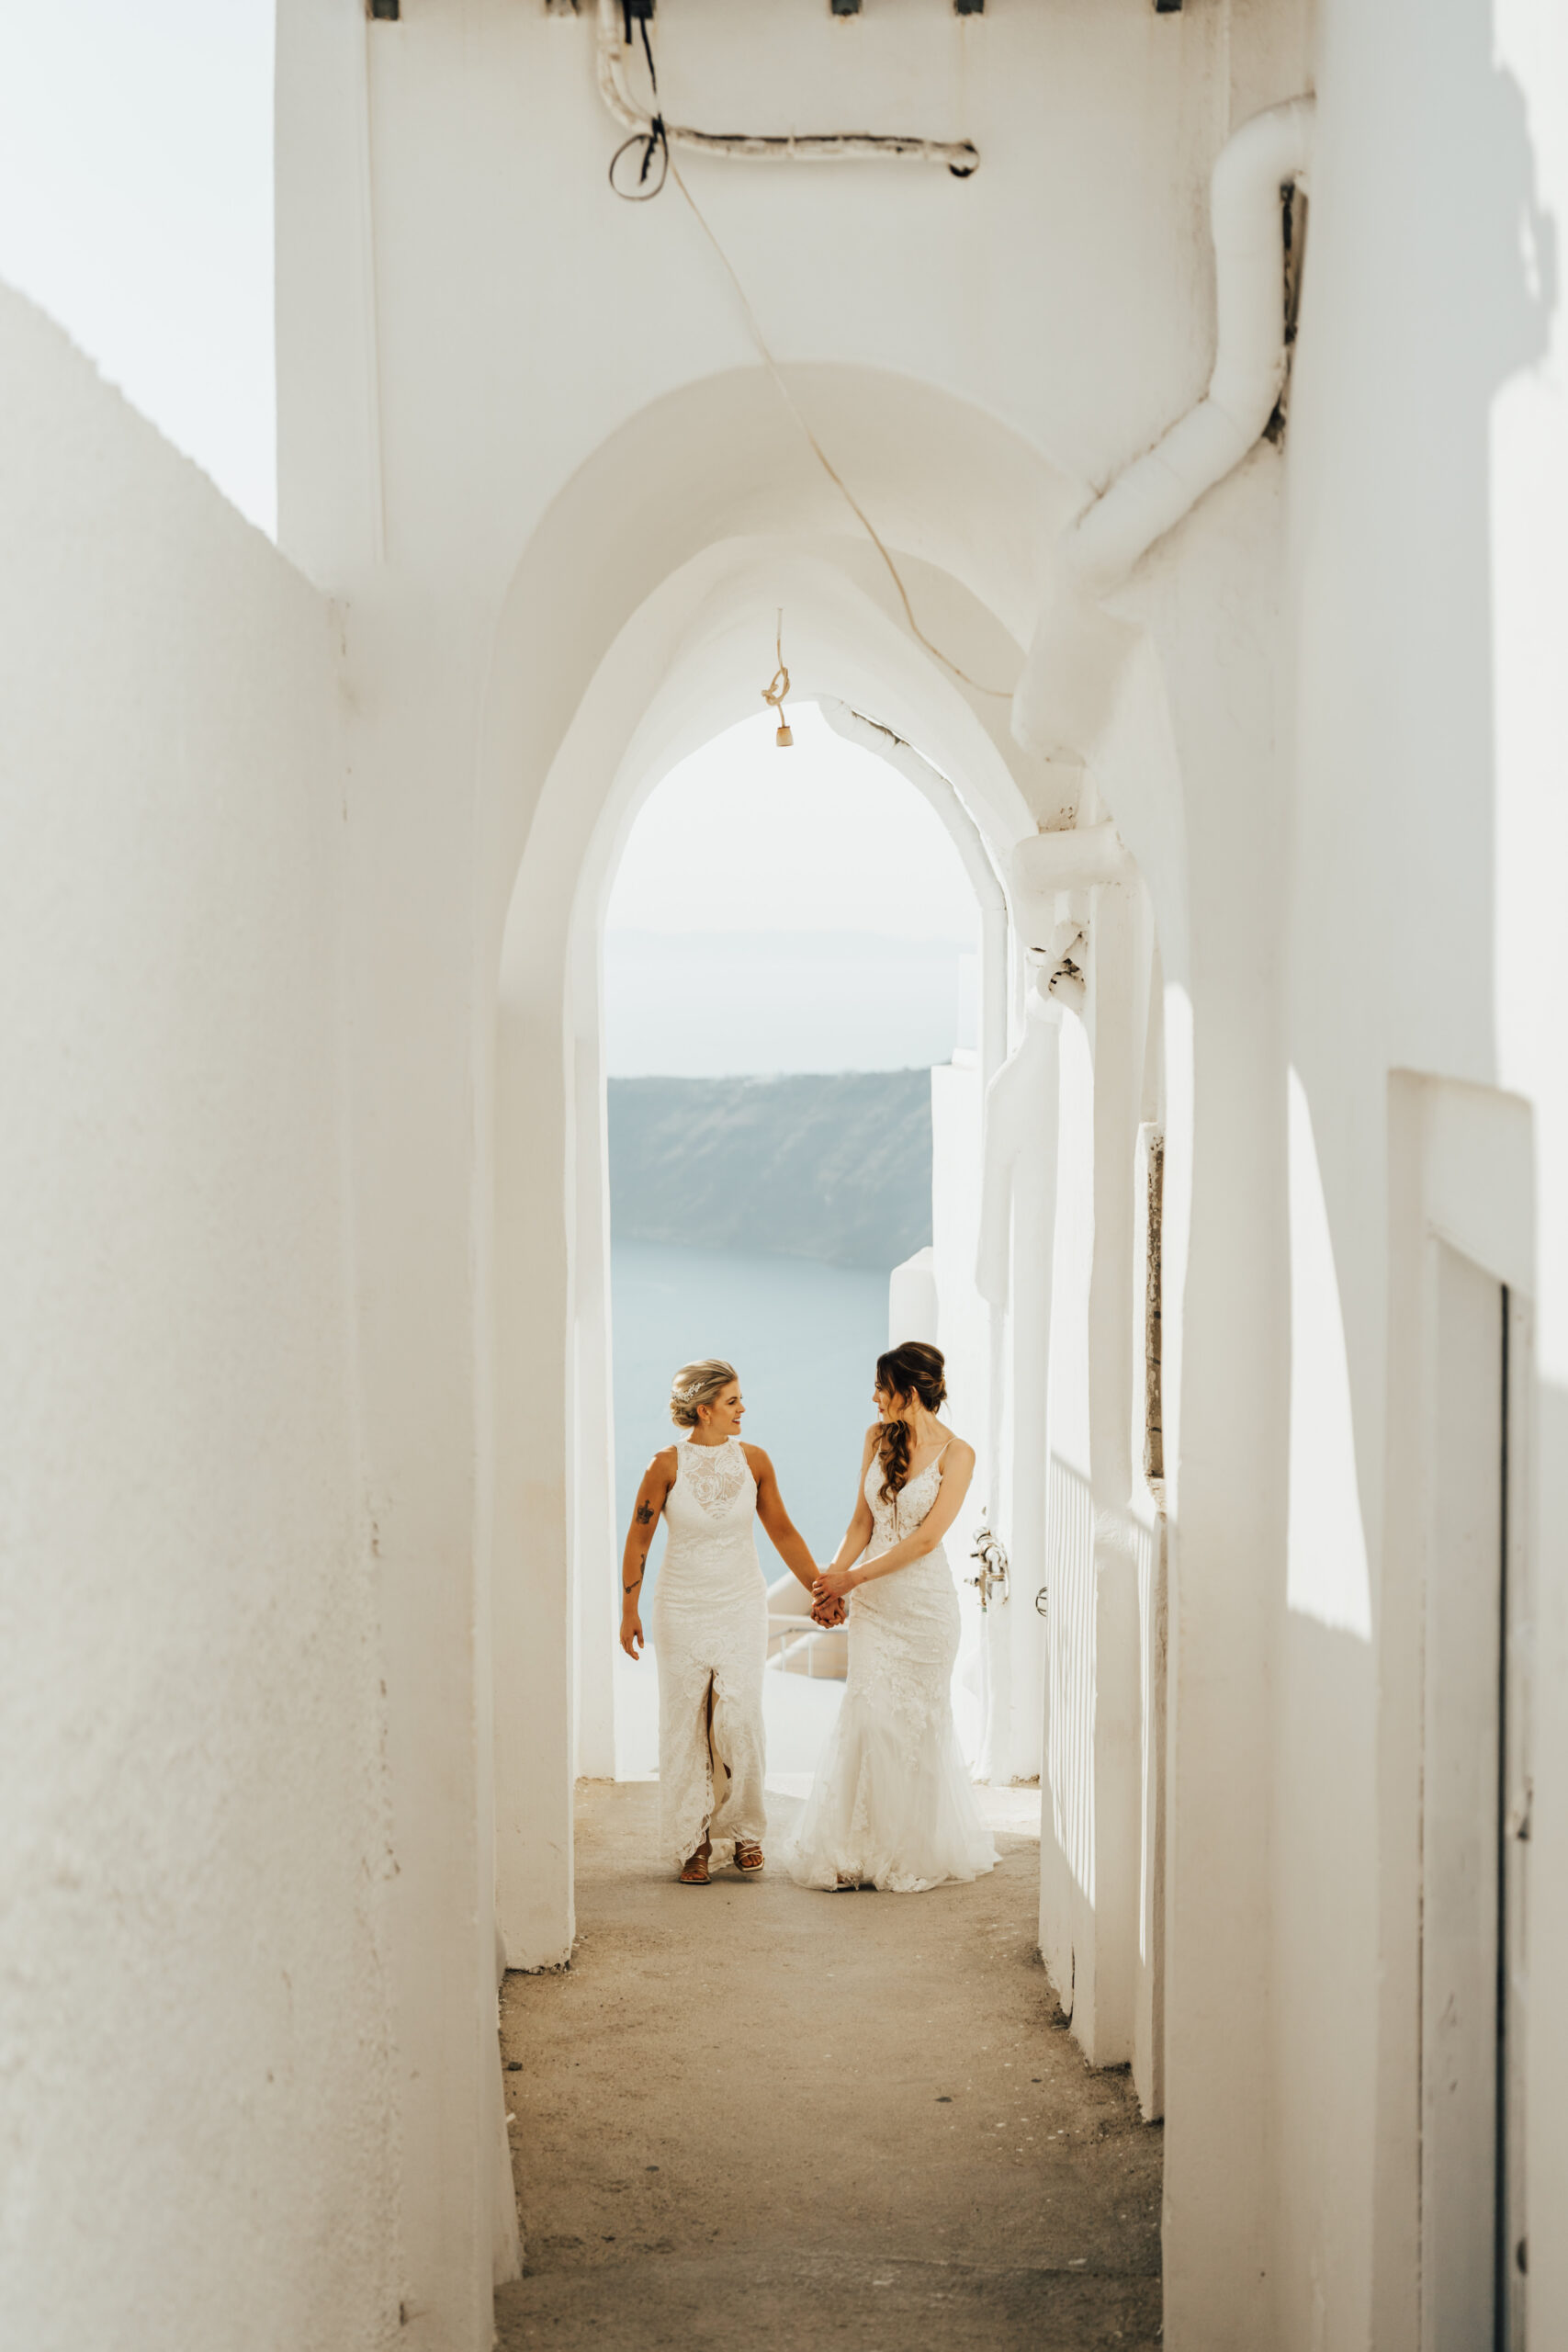 Two brides walking holding hands in Santorini